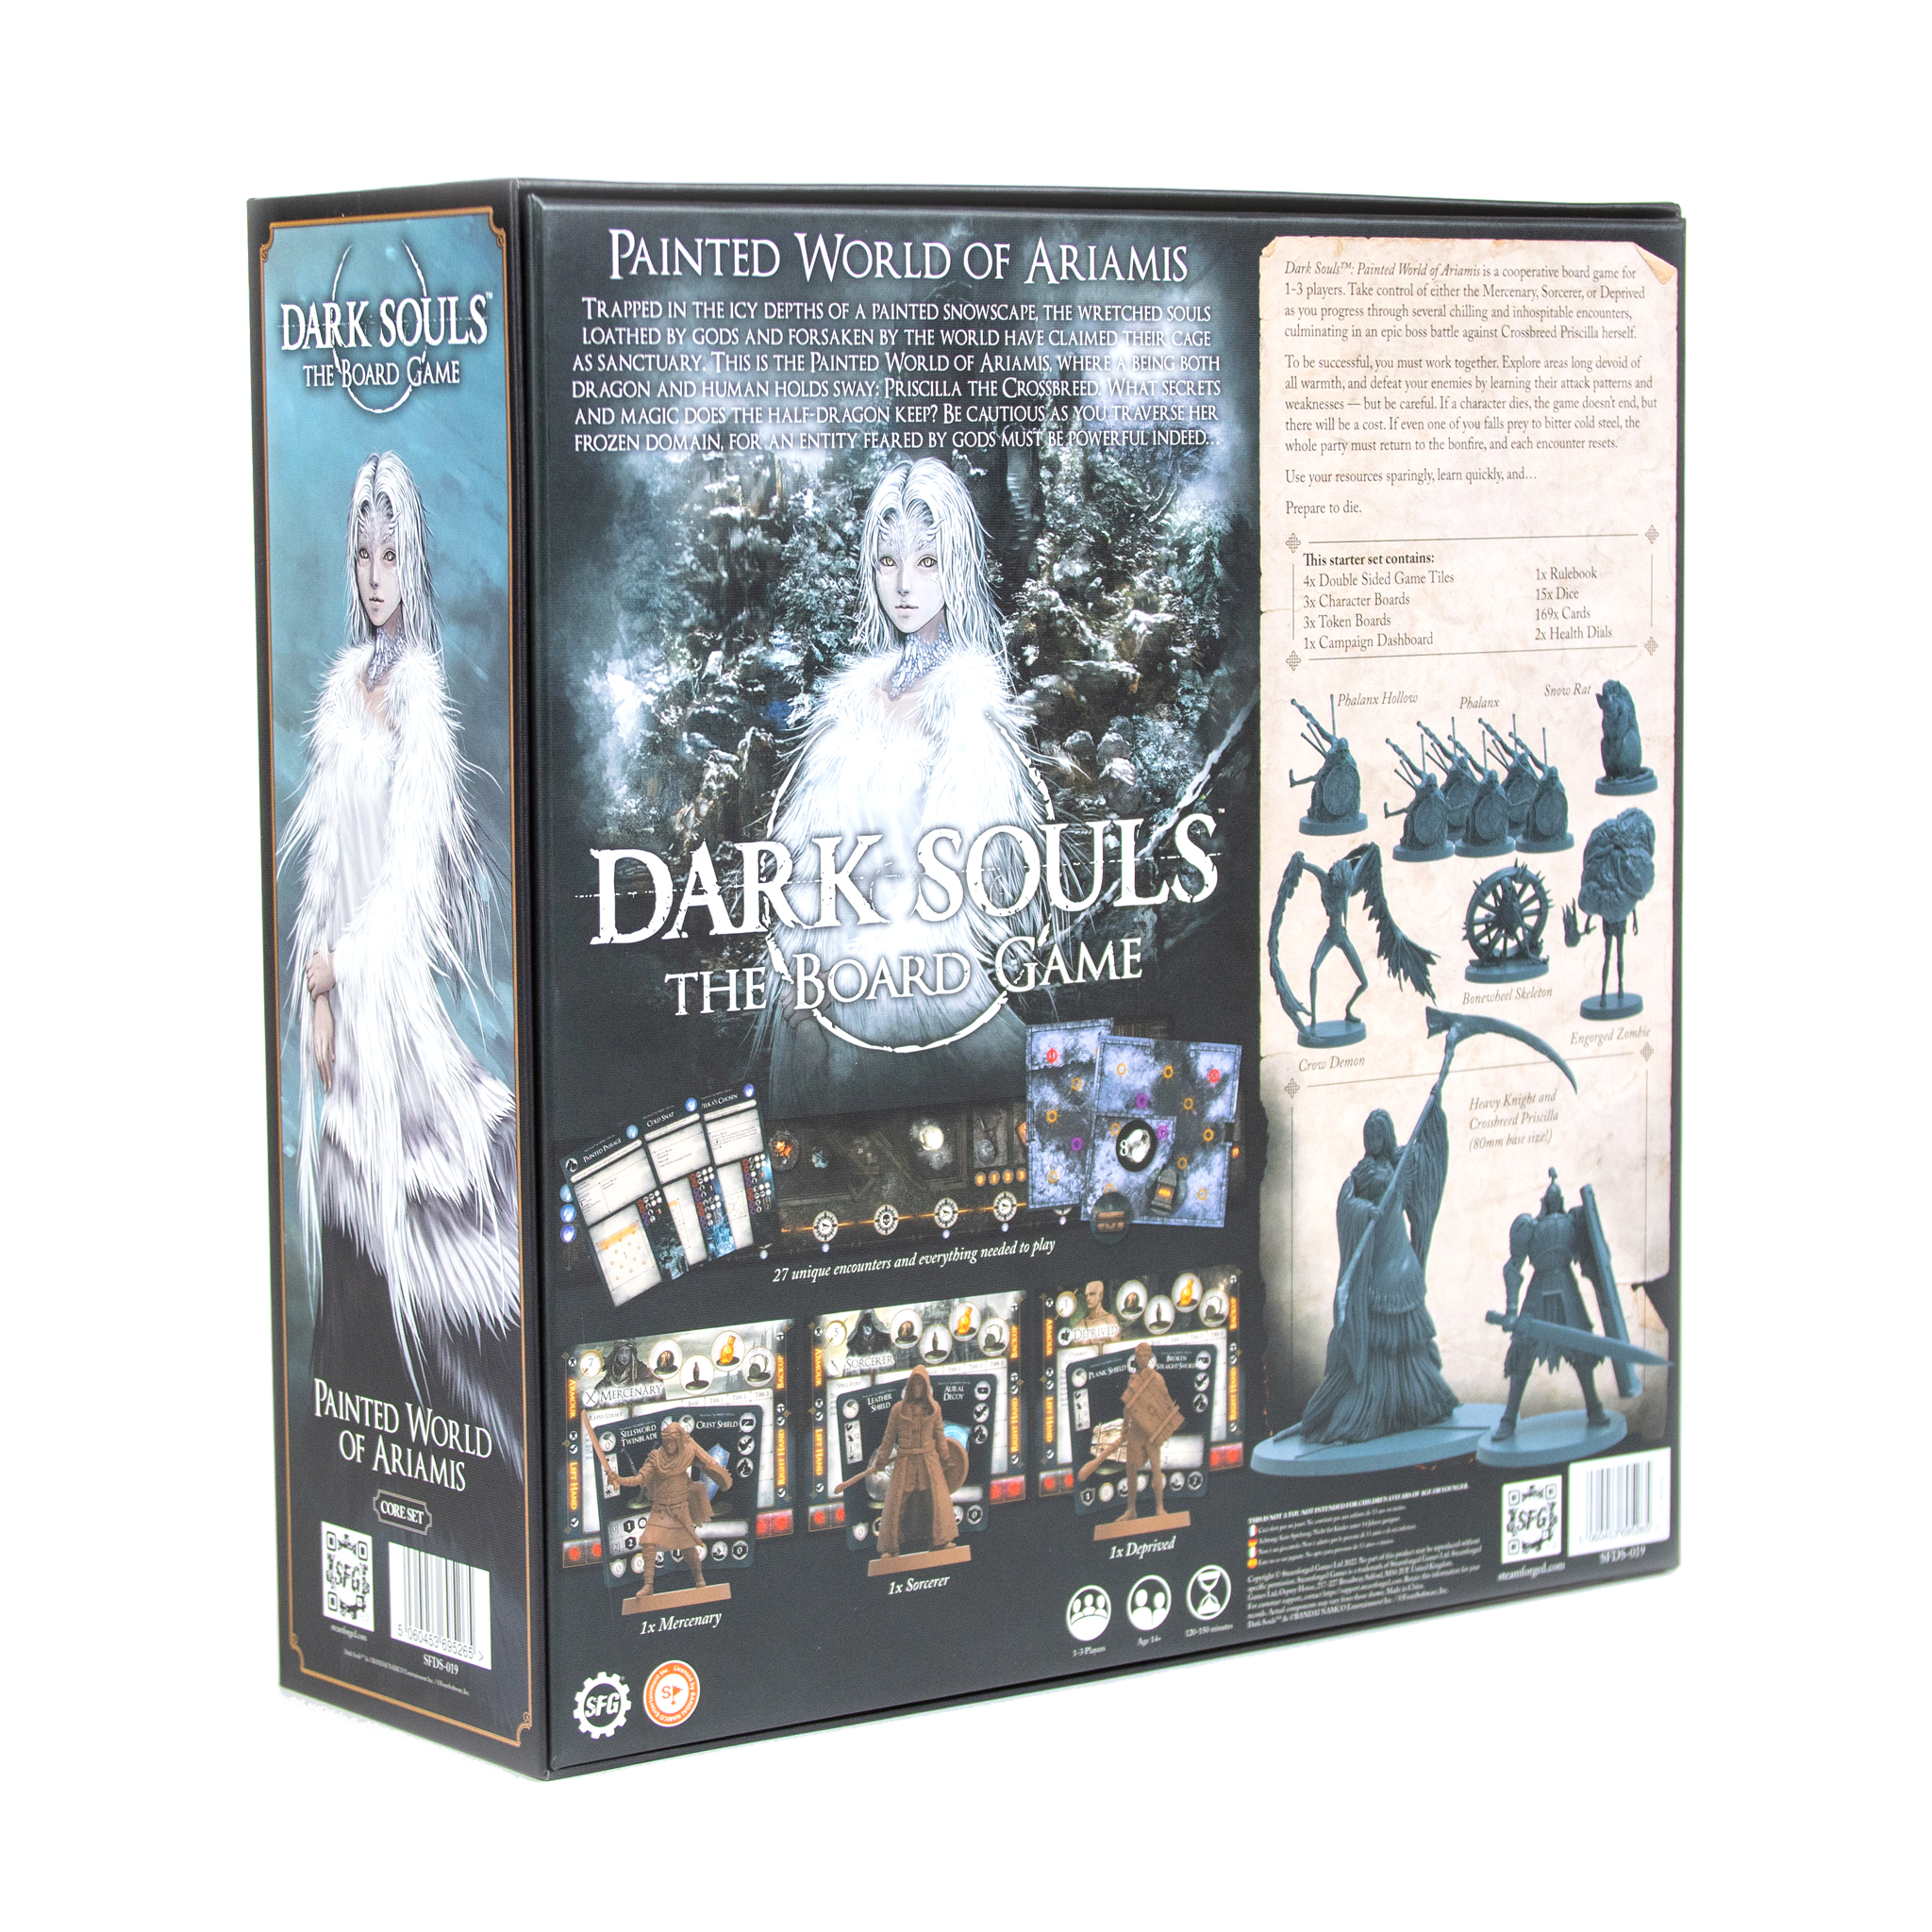 Dark Souls: The Board Game - The Painted World of Ariamis Core Set